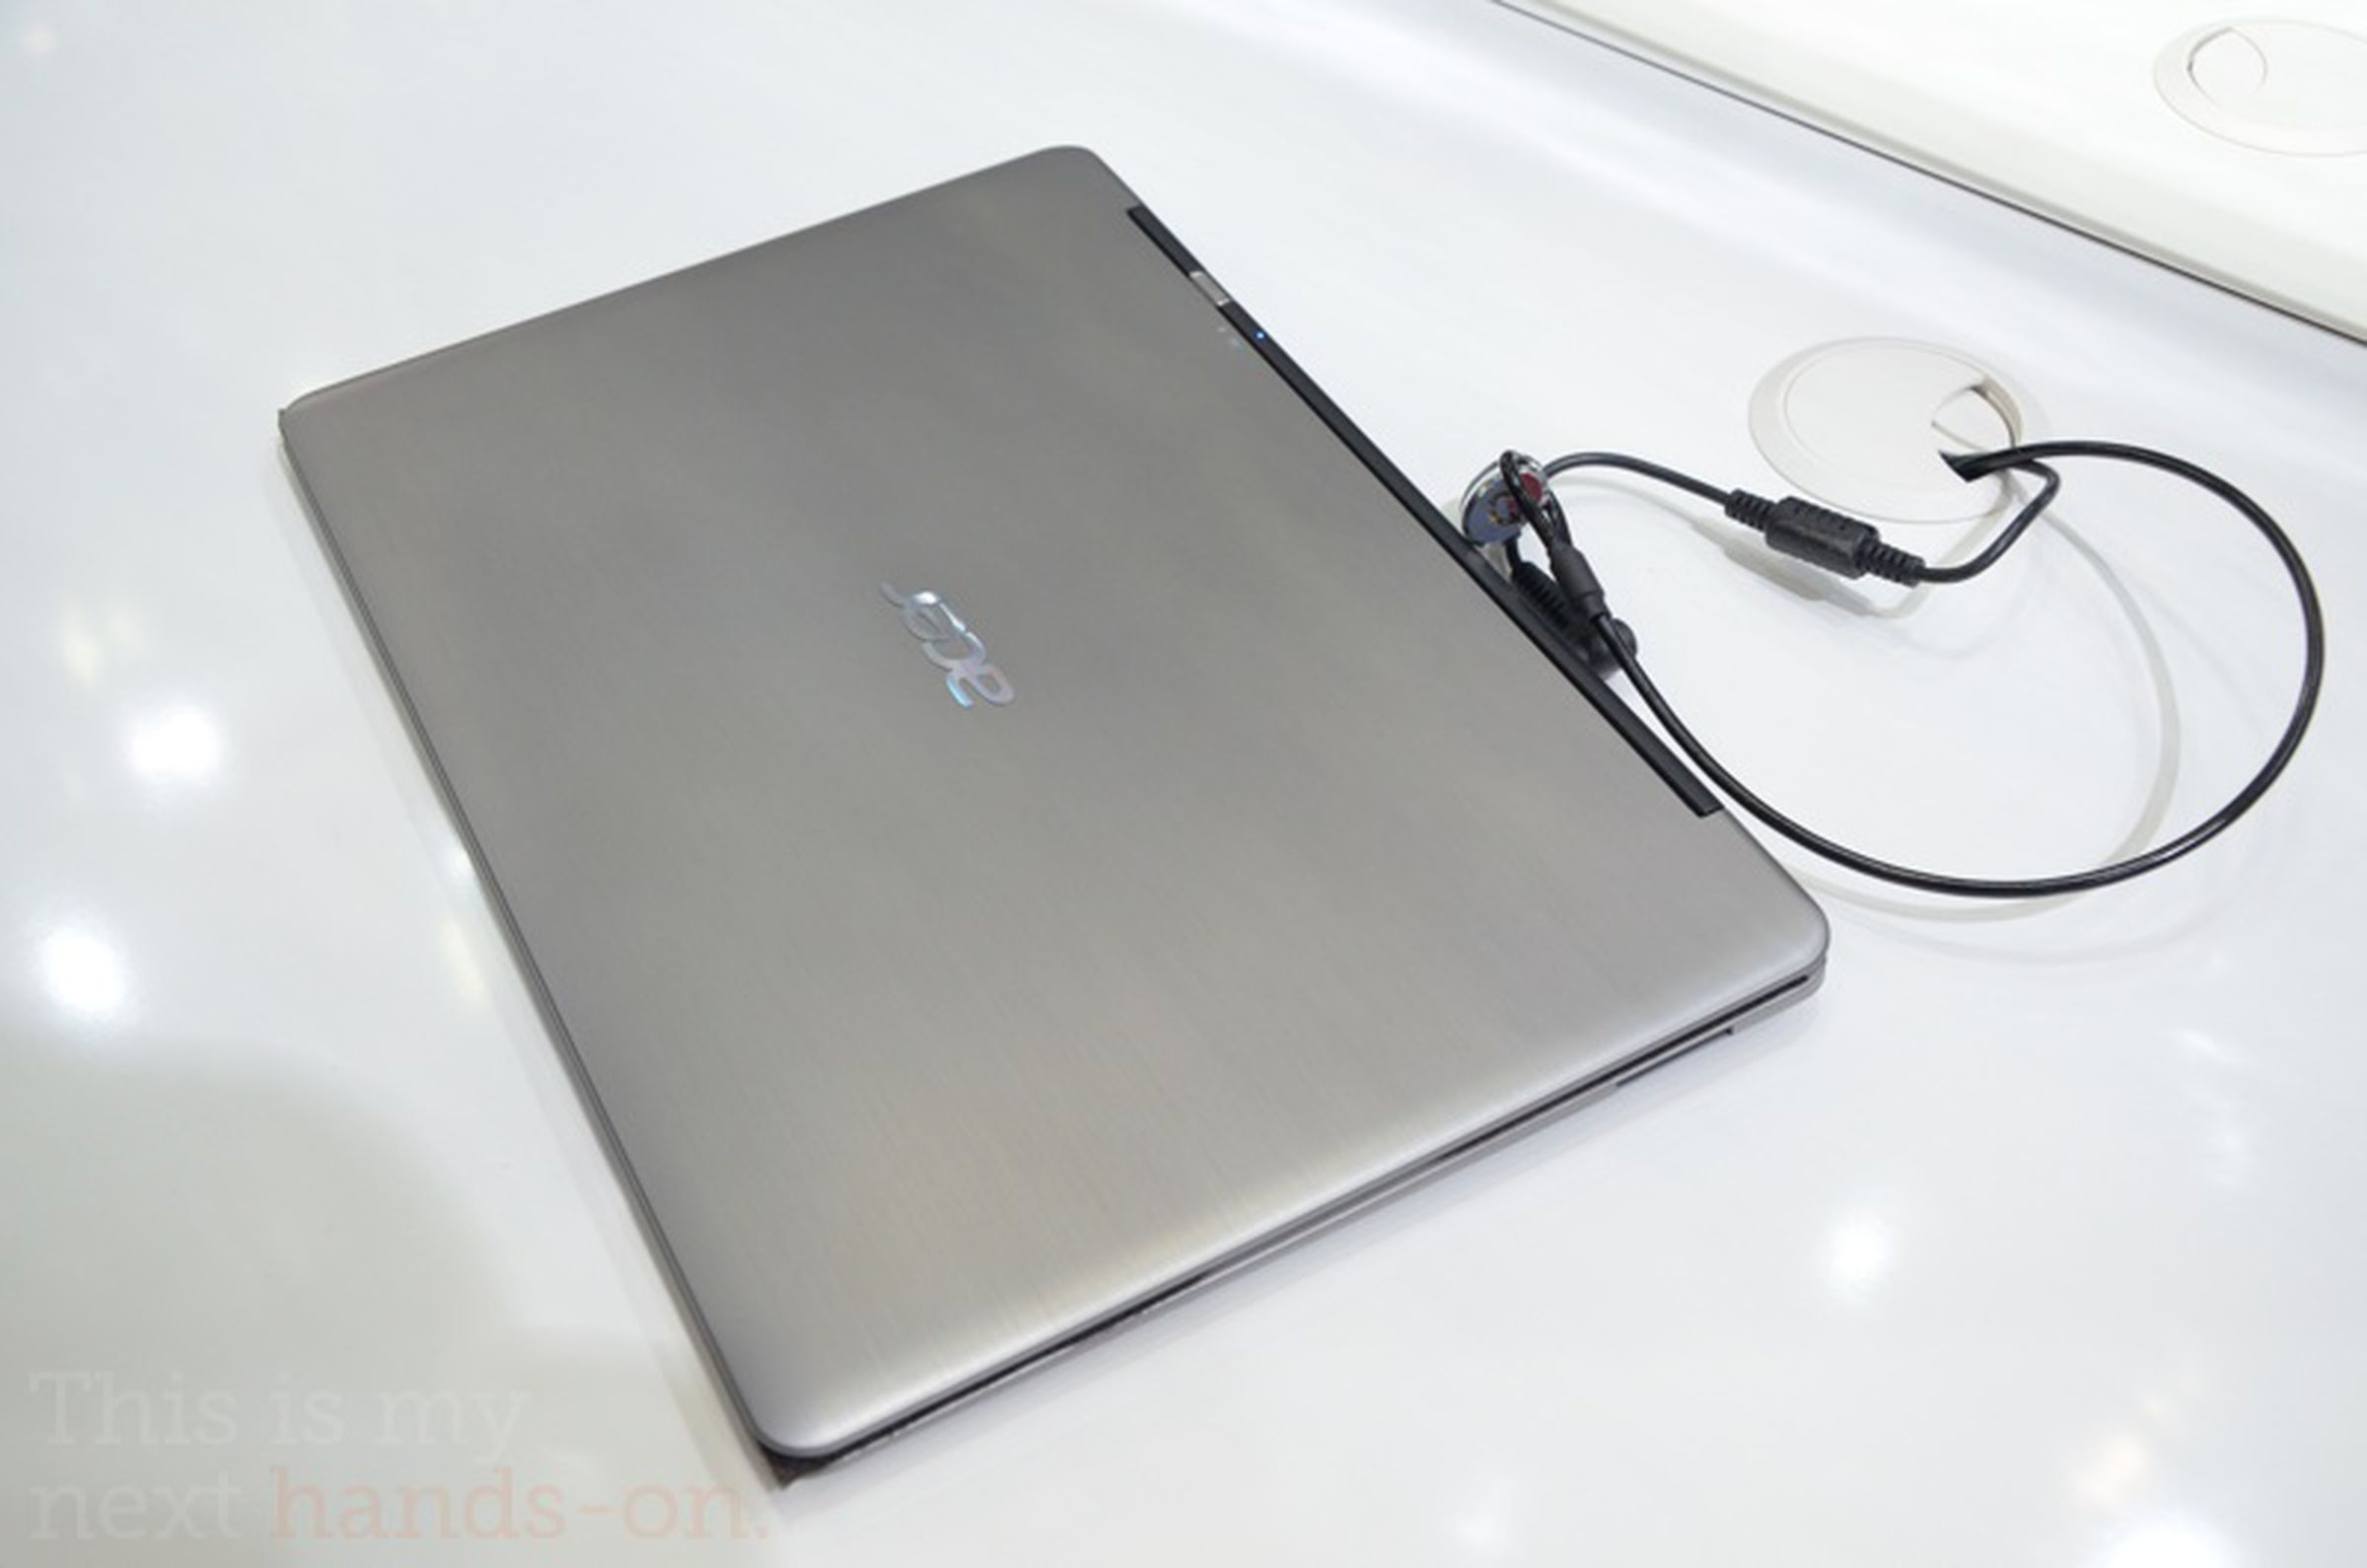 Acer Aspire S3 hands-on photos